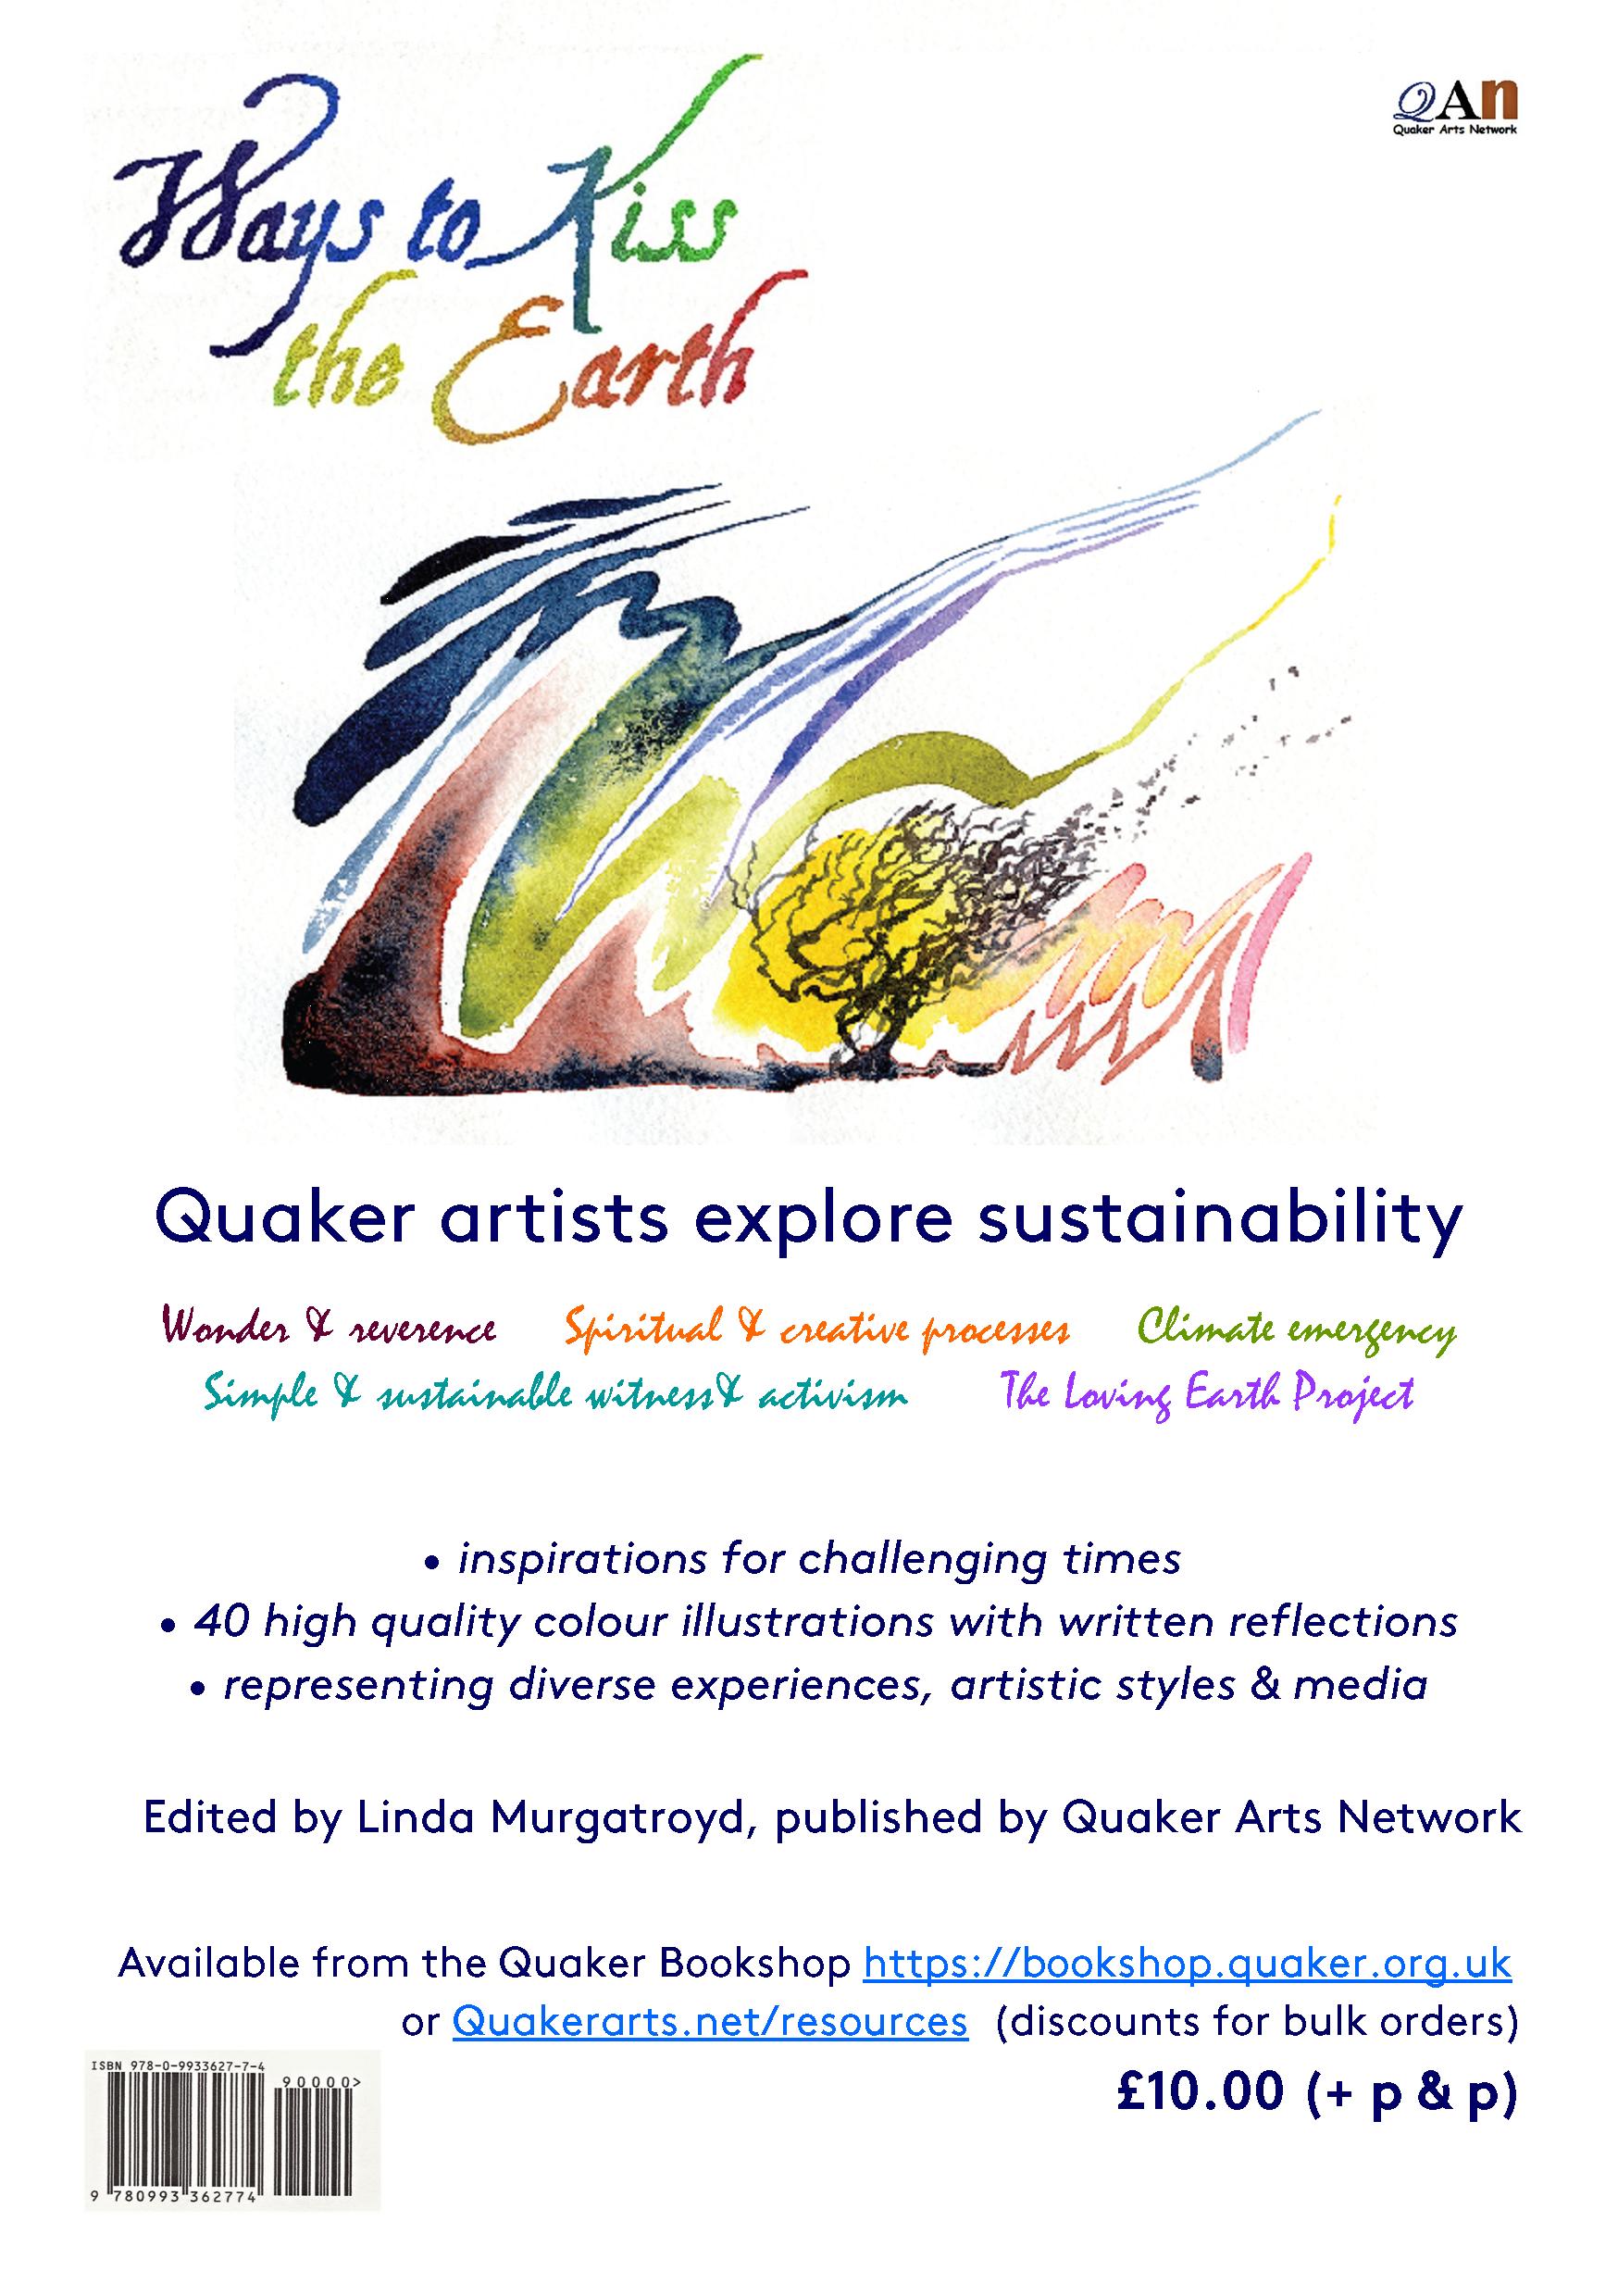 An evening of Quaker Arts by Zoom - Quaker Arts Network